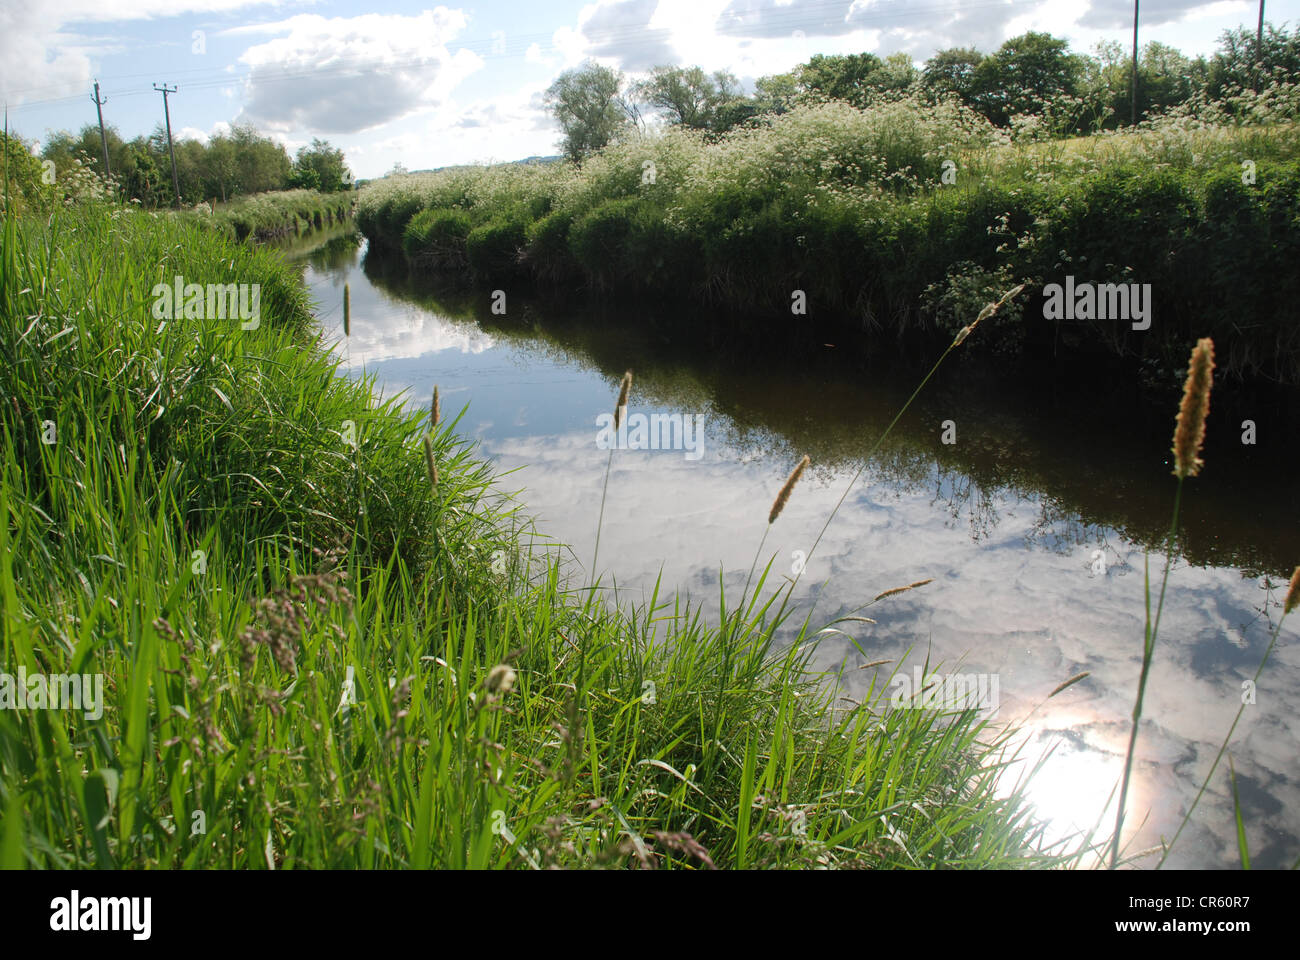 The Six Mile river in County Antrim on a summer evening. Picture by: Adam Alexander/Alamy Stock Photo